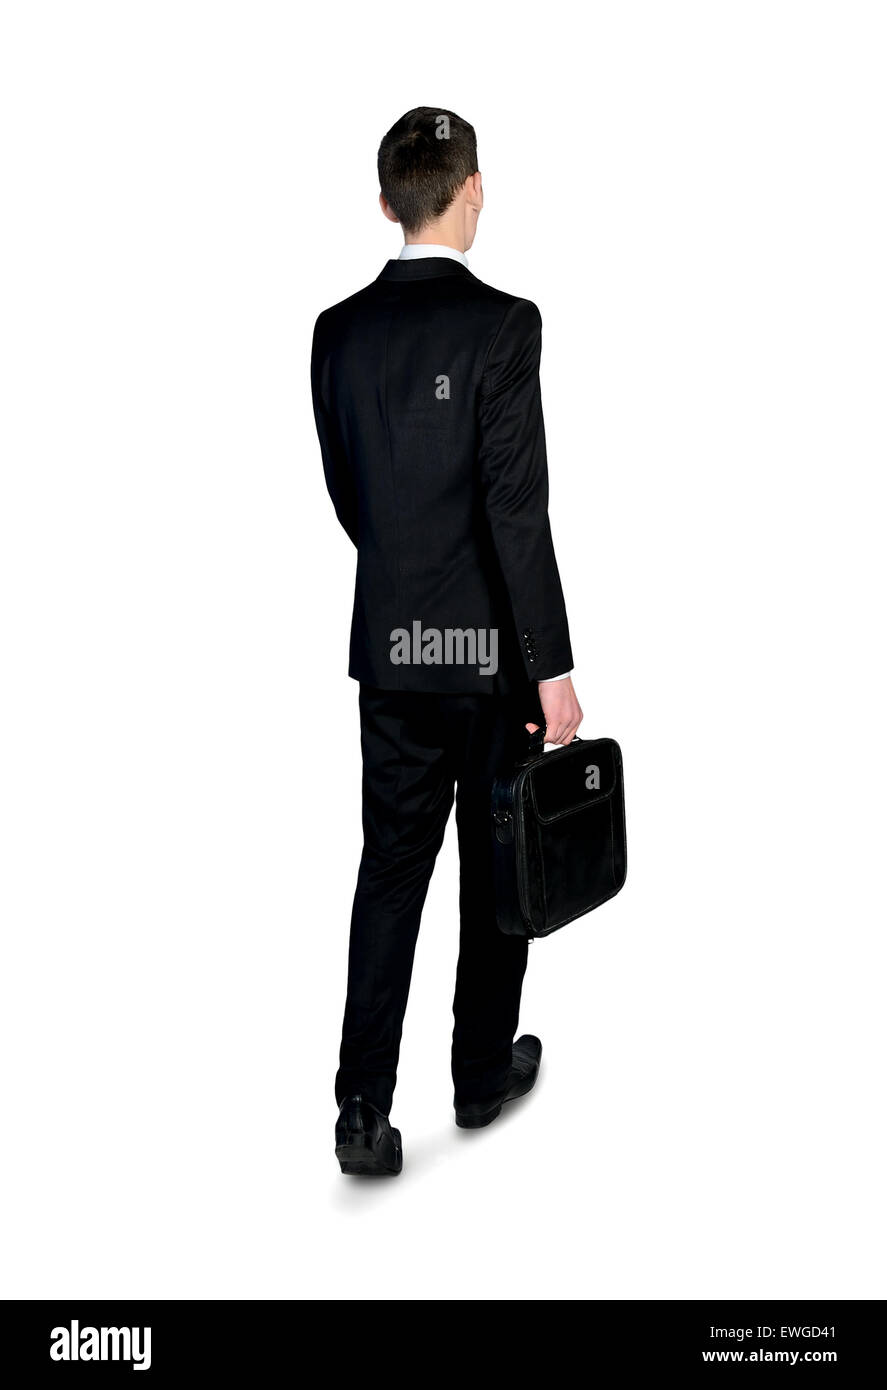 Isolated business man walking back view Stock Photo - Alamy